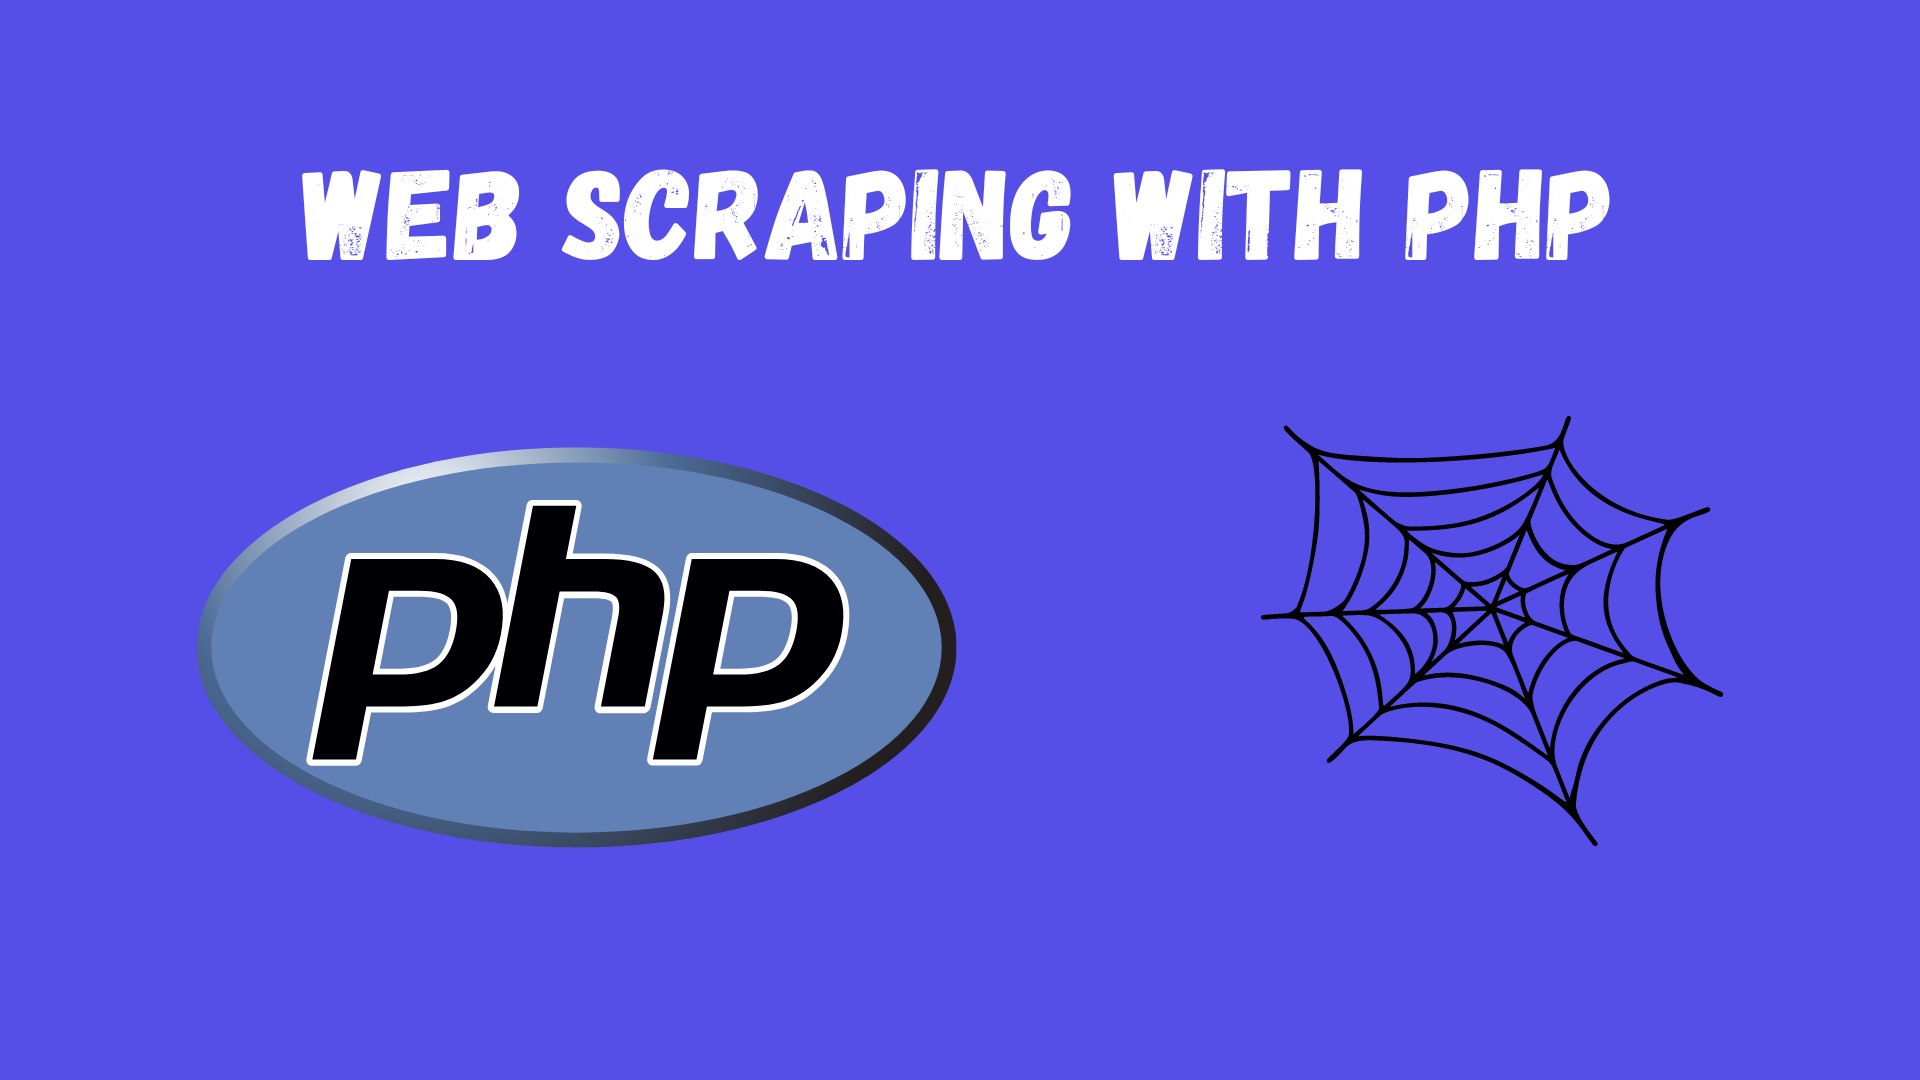 Web Scraping With PHP